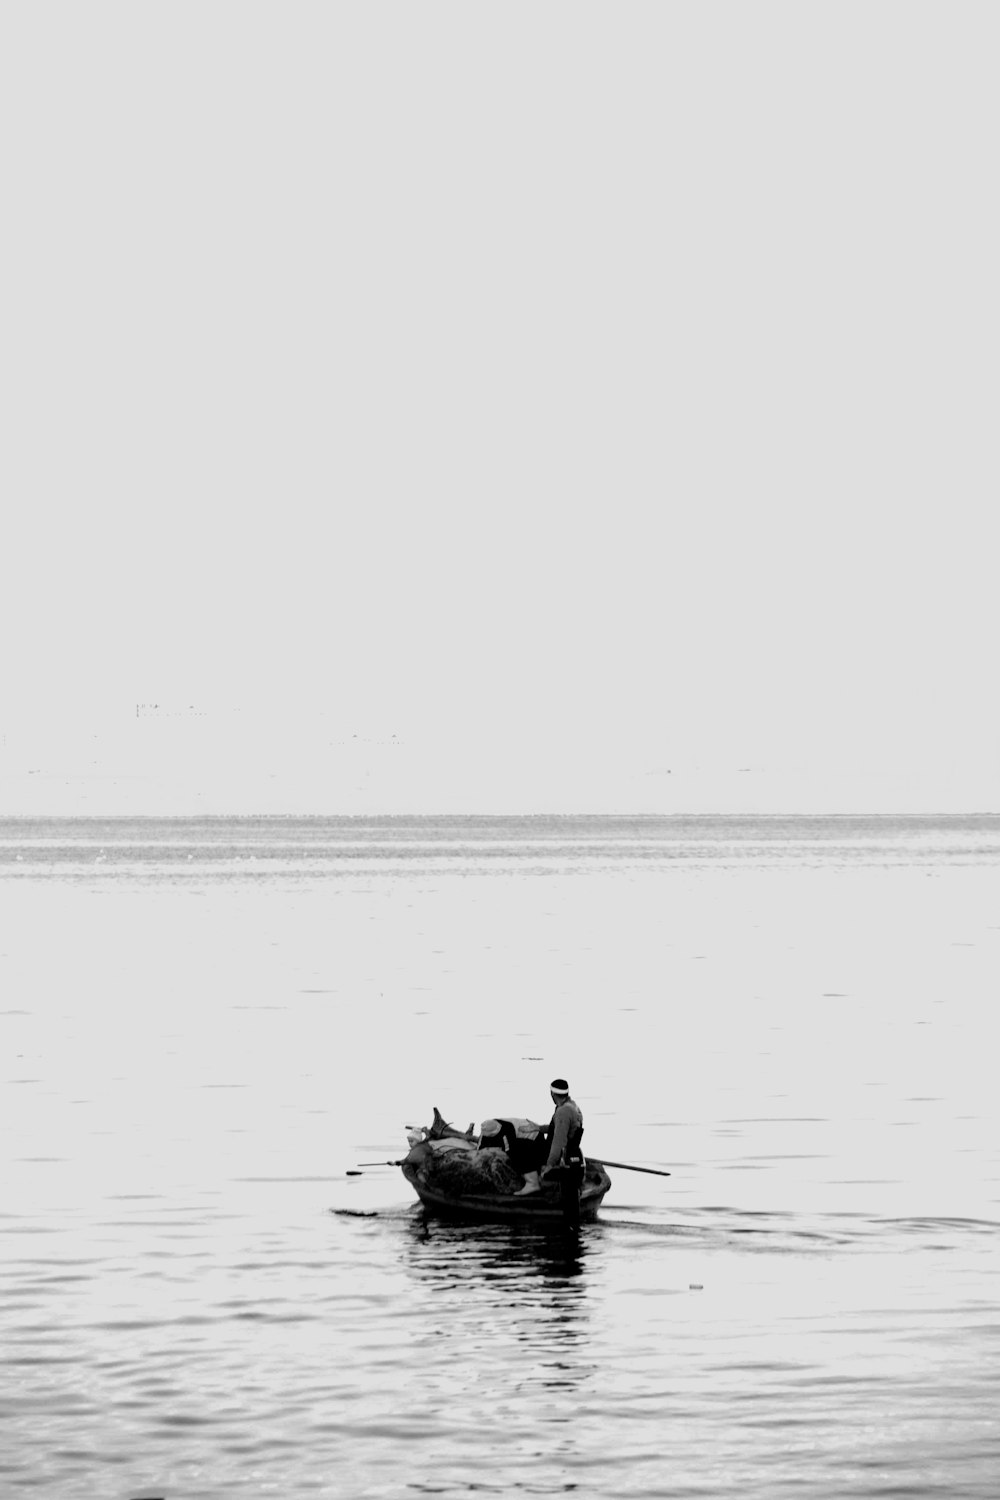 grayscale photography of man riding on boat